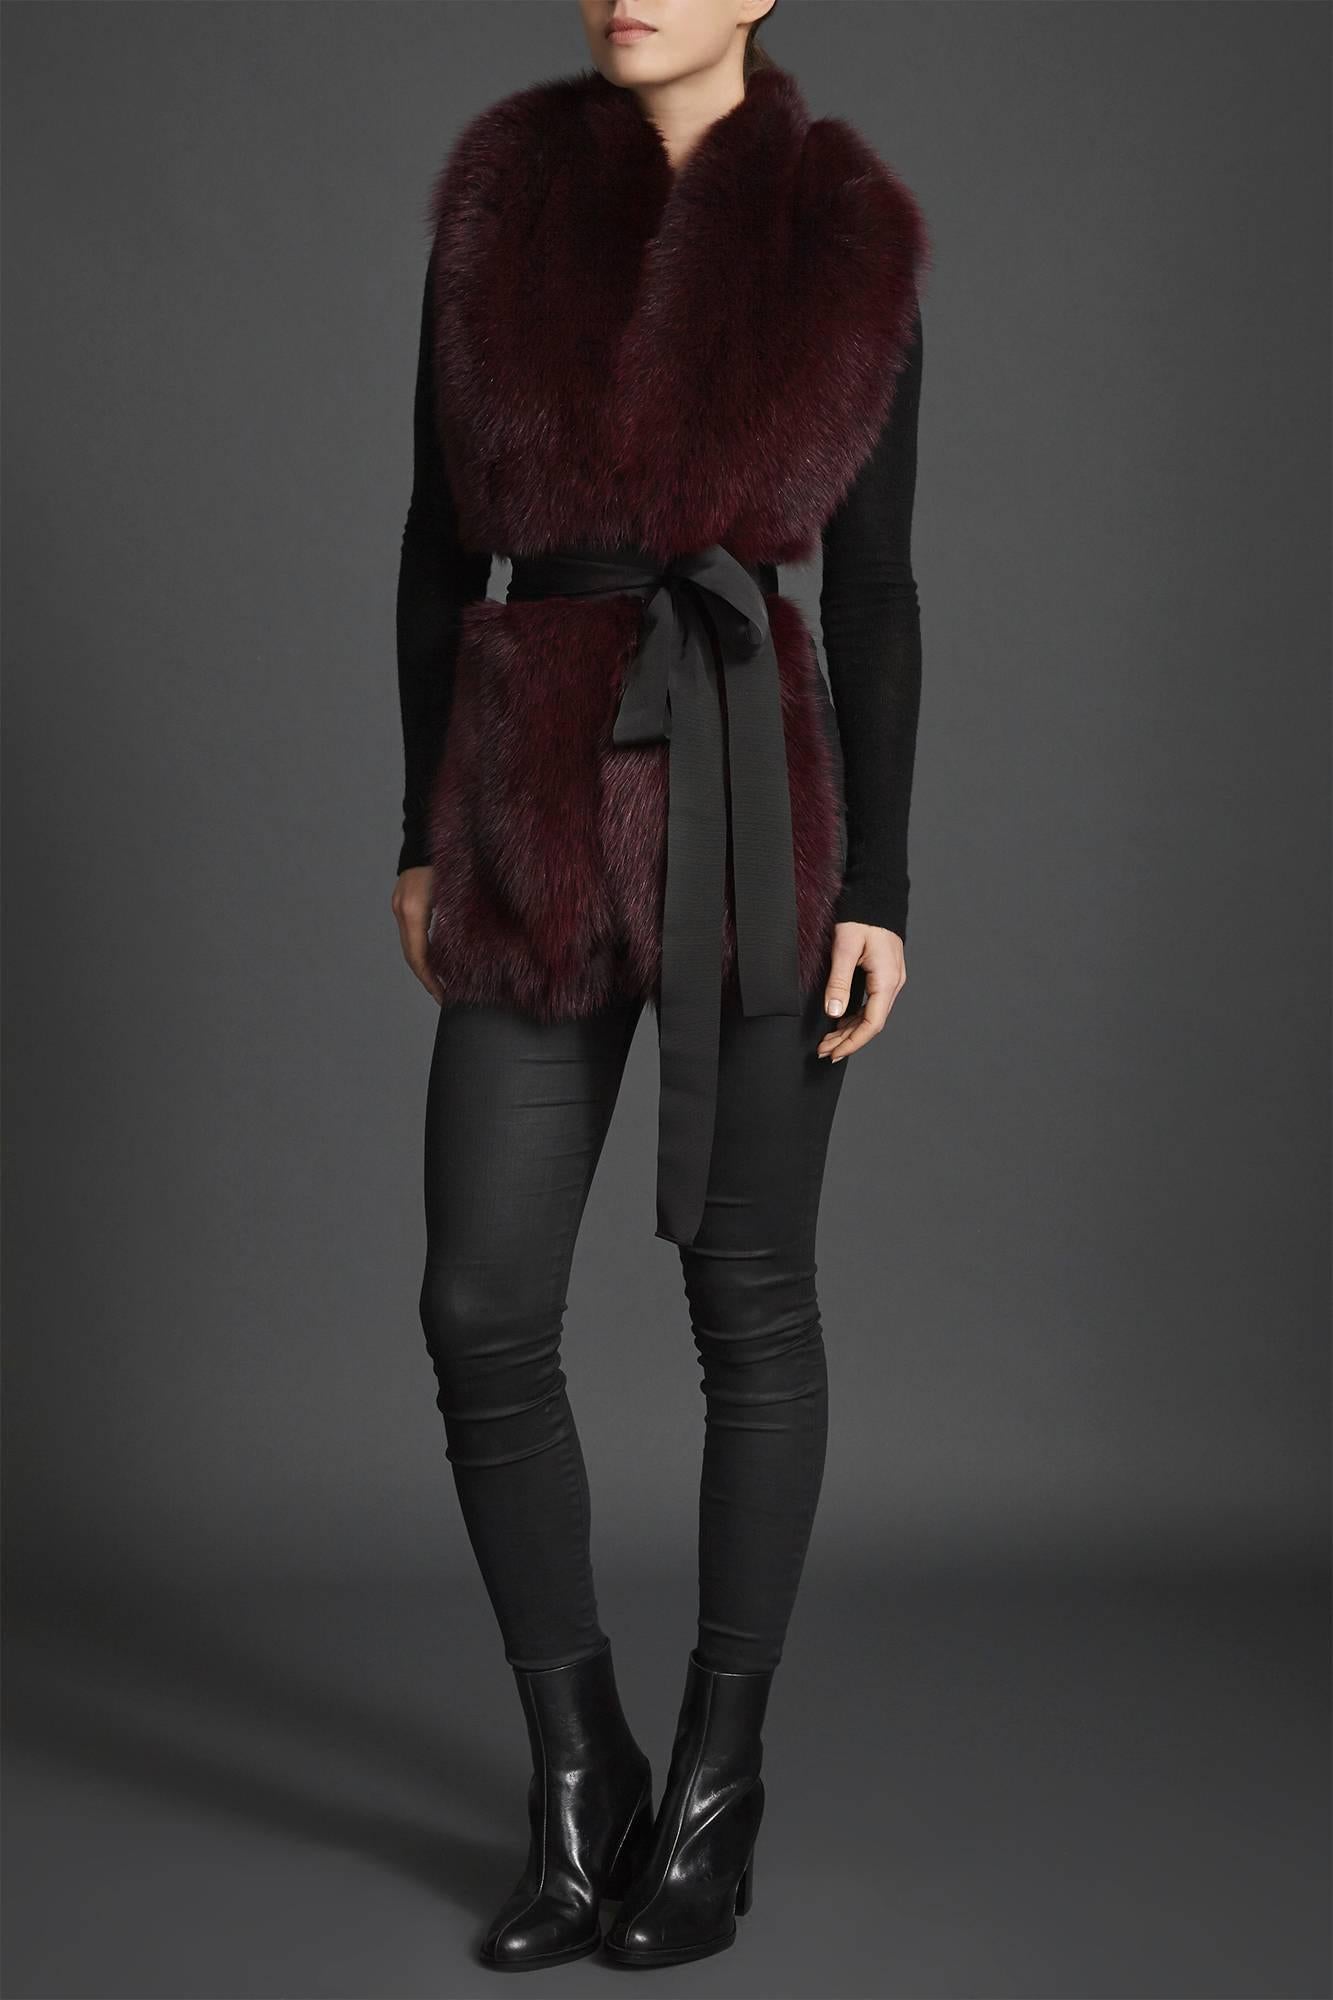 Verheyen London Legacy Stole in Garnet Burgundy Fox Fur 

The Legacy Stole is Verheyen London’s versatile design to be worn from day to night. Crafted in the finest dyed fox fur and lined in coloured silk satin.  A structured design to wrap over